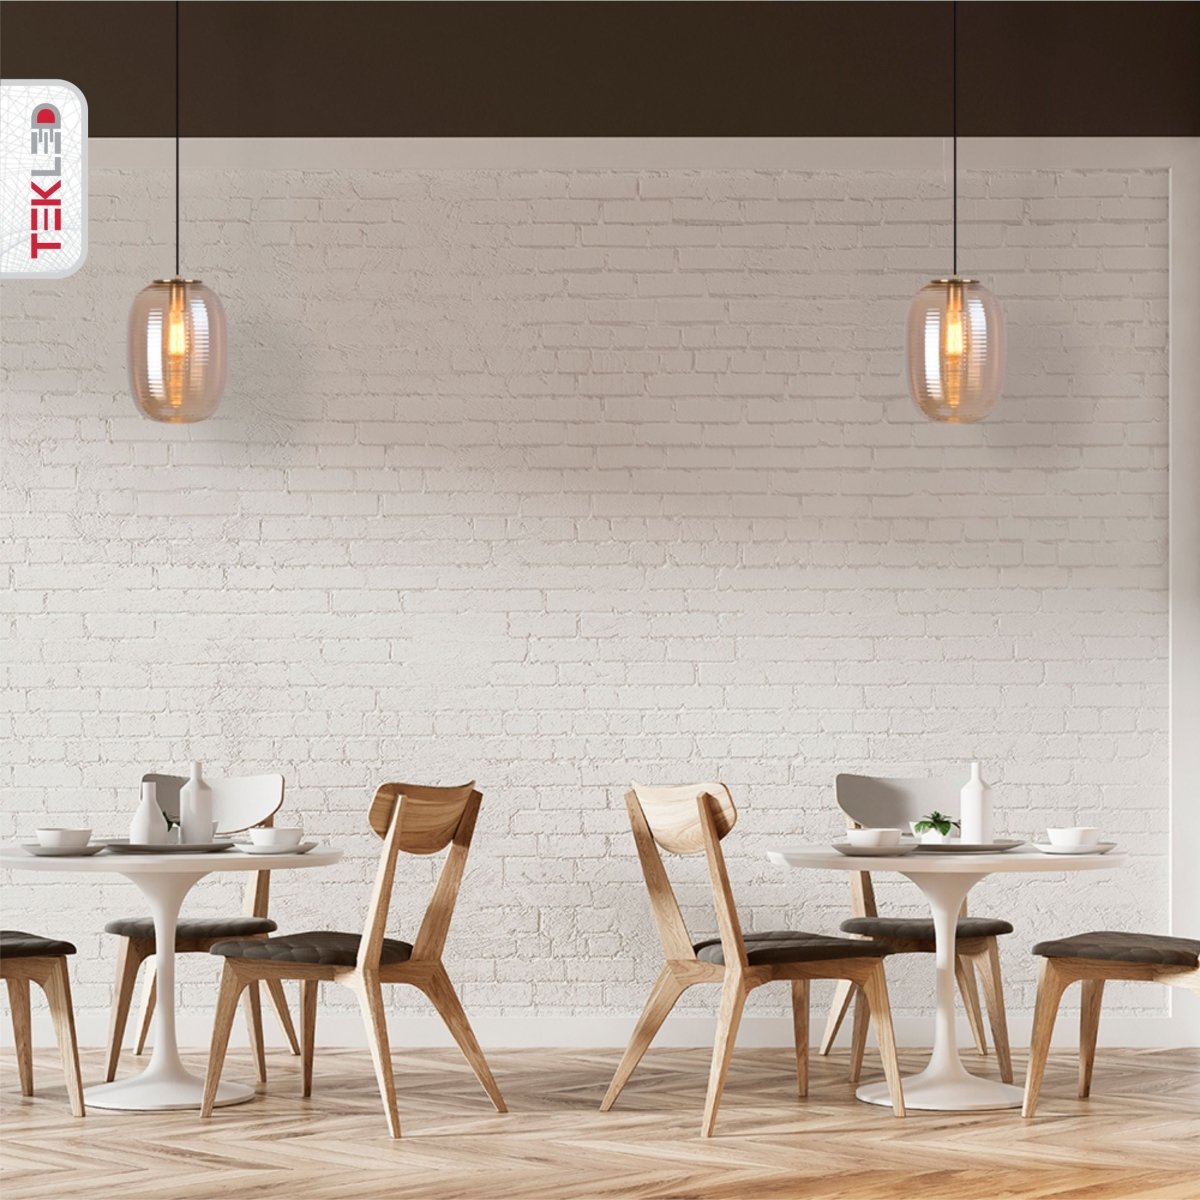 More interior usage of Bee Hive Amber Glass Pendant Light with E27 Fitting | TEKLED 159-17344